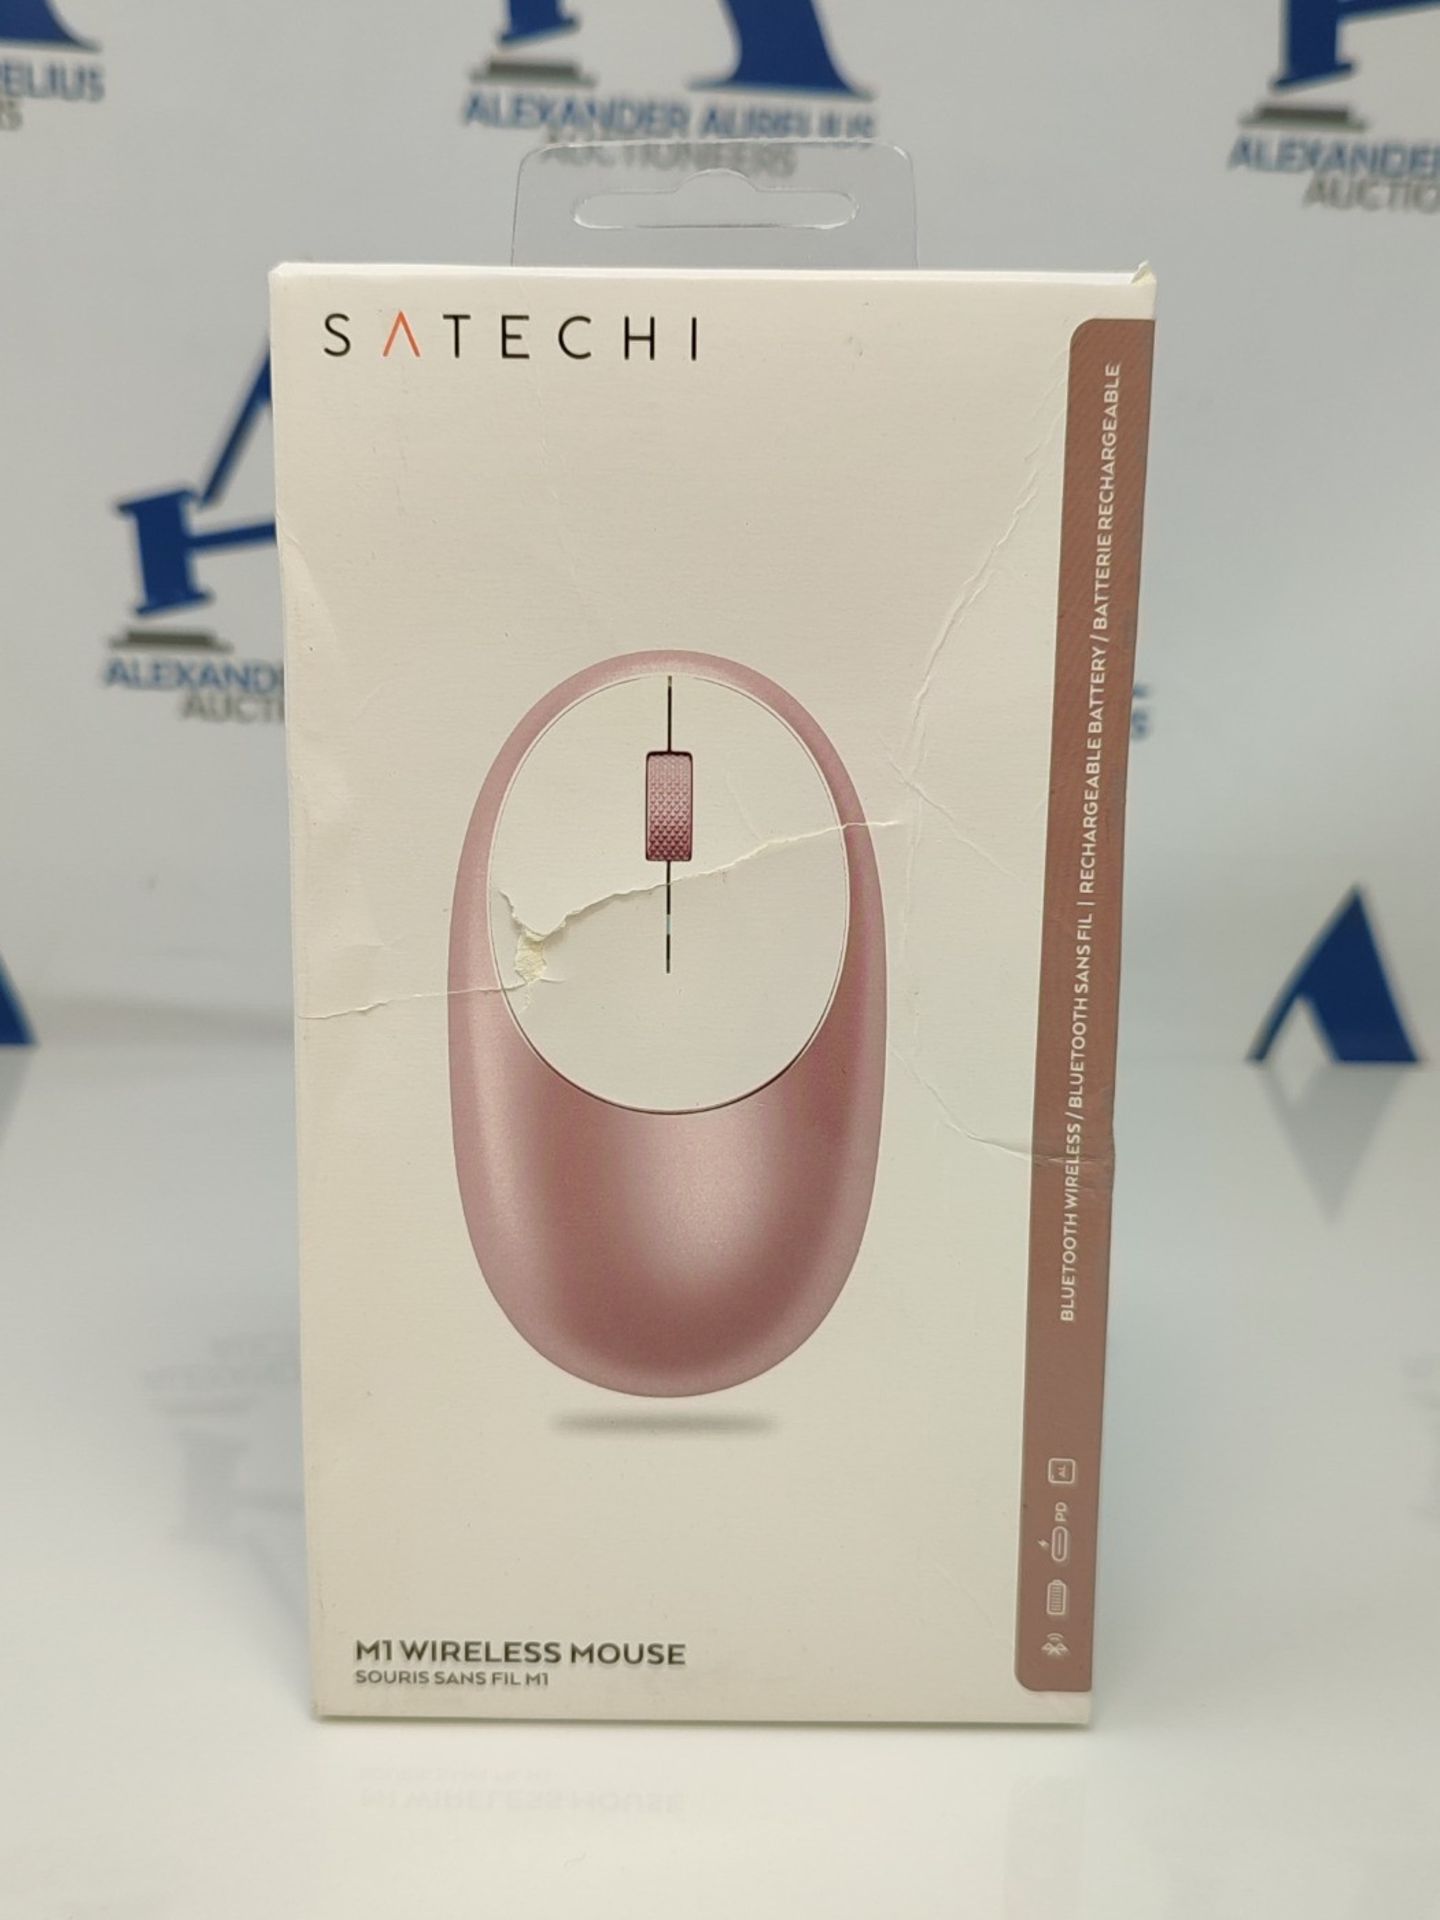 Satechi M1 Mouse Bluetooth Wireless in Aluminum with Rechargeable Type-C Port - for M2